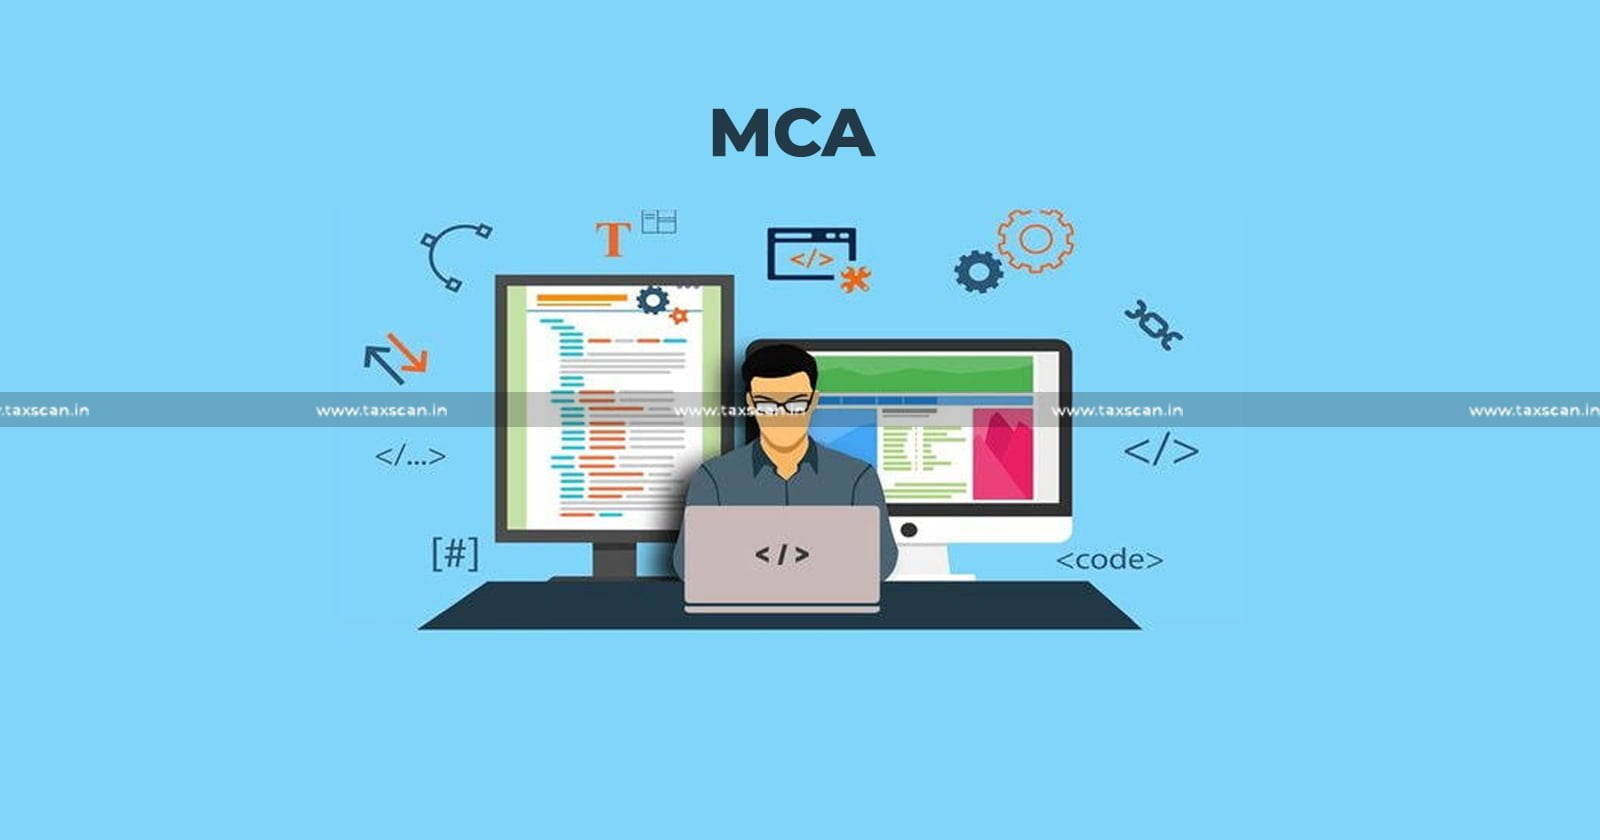 MCA - Amends- Companies - Rules - Revises - Forms - TAXSCAN